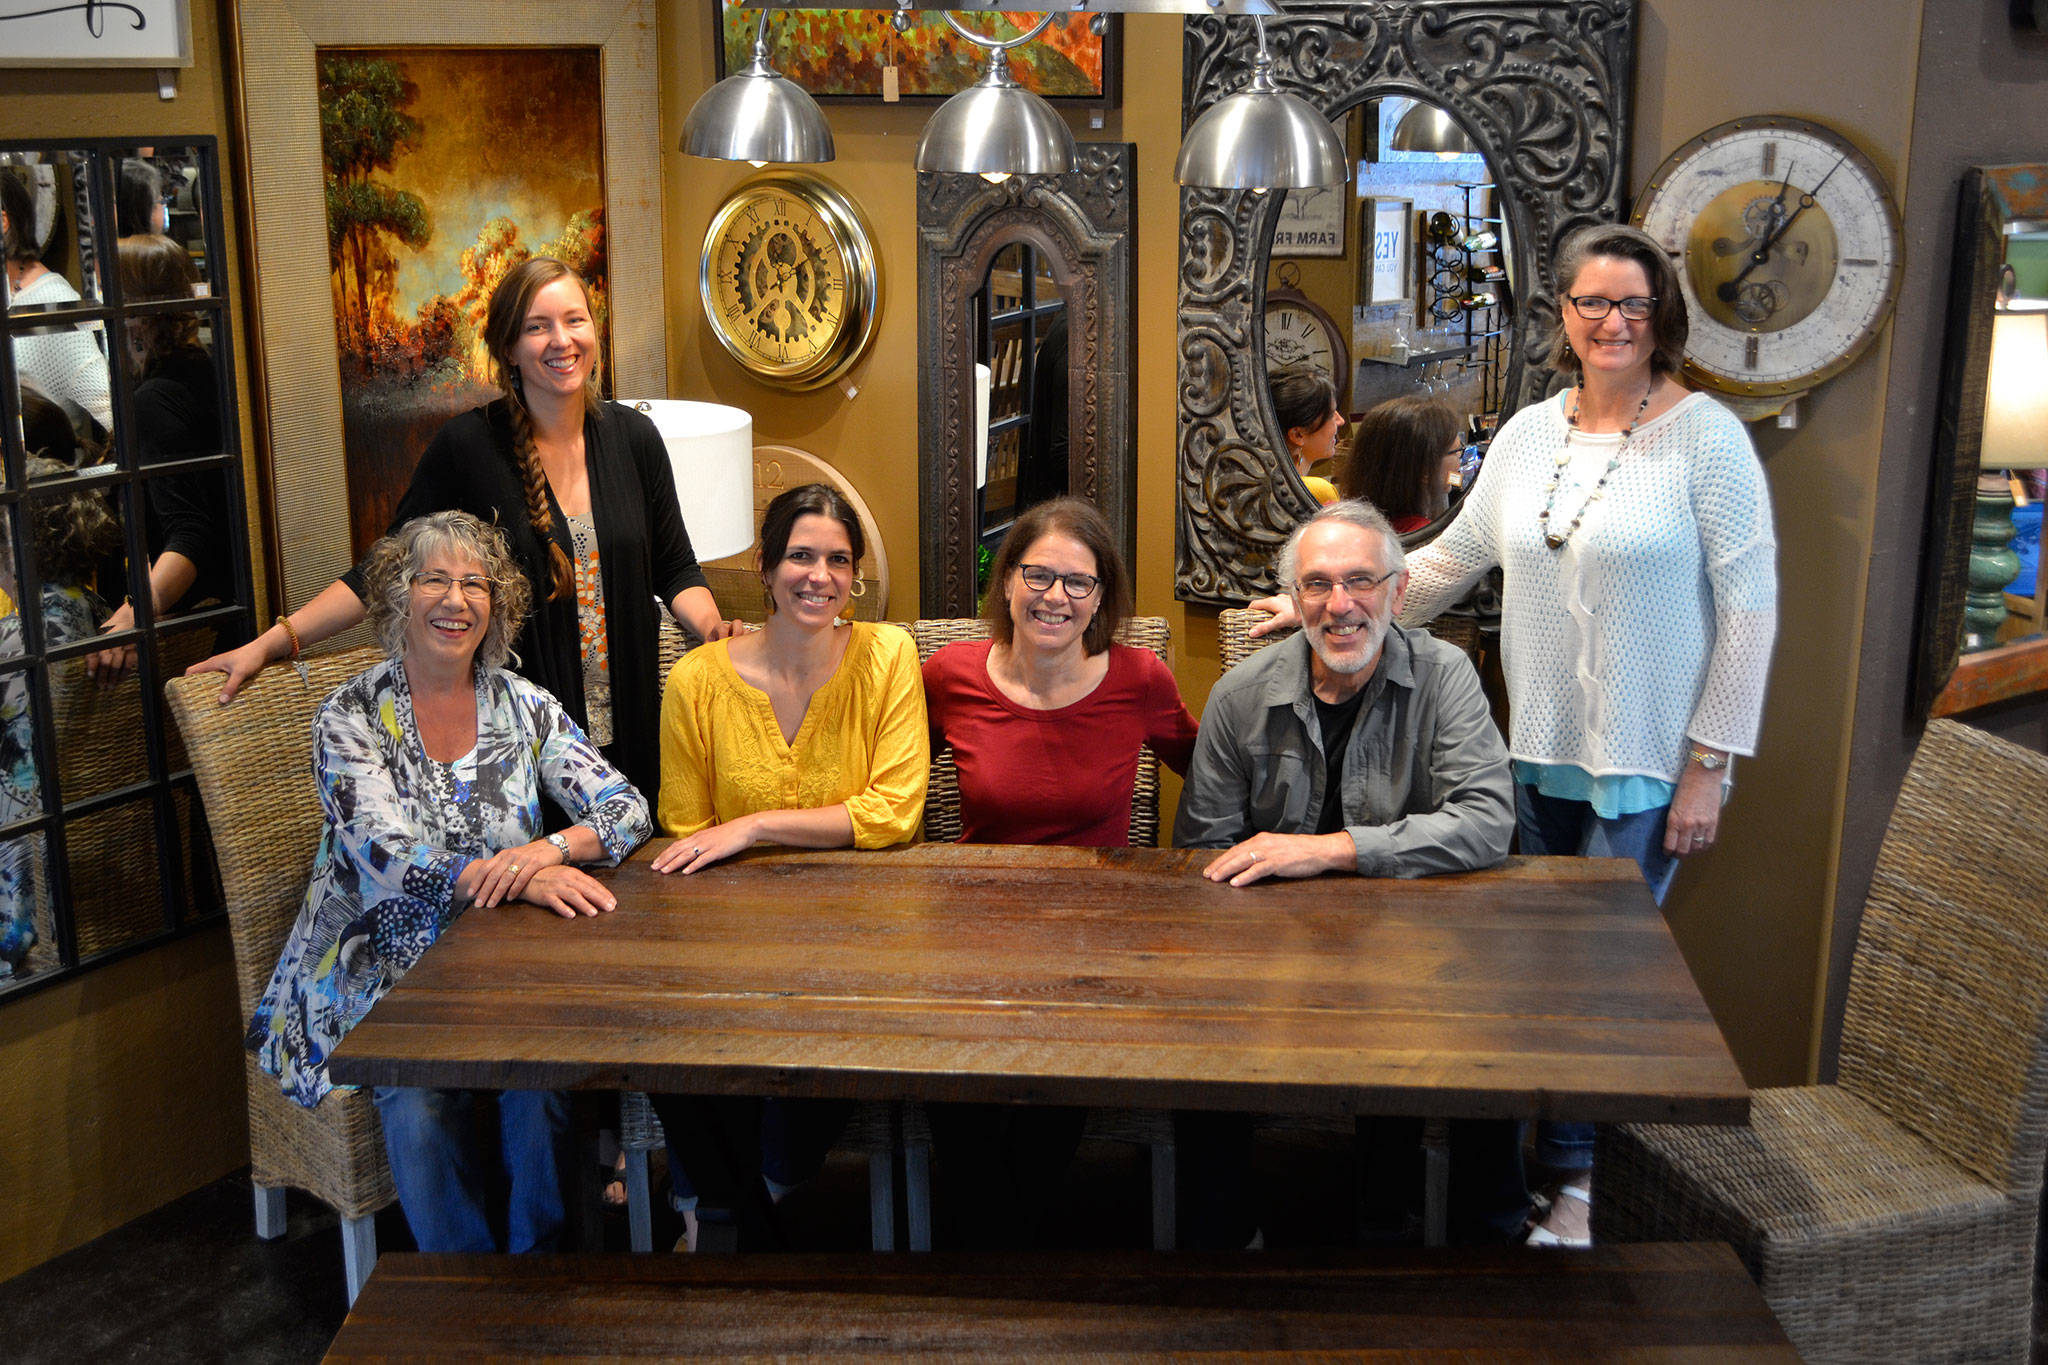 Jeri and Fran Sanford, fourth and fifth from left, recently listed their 20-year-old business Over the Fence for sale. They’ve offered home furnishings from around the world for more than 20 years. Staff for the store include, from left, Katy Nichols, Bergen Carey, Emily Underwood, Jeri and Fran Sanford, and Joanie May. Not pictured are Iris Edey, Cathy Lopes and Chris Biedermanngarde. Sequim Gazette photo by Matthew Nash